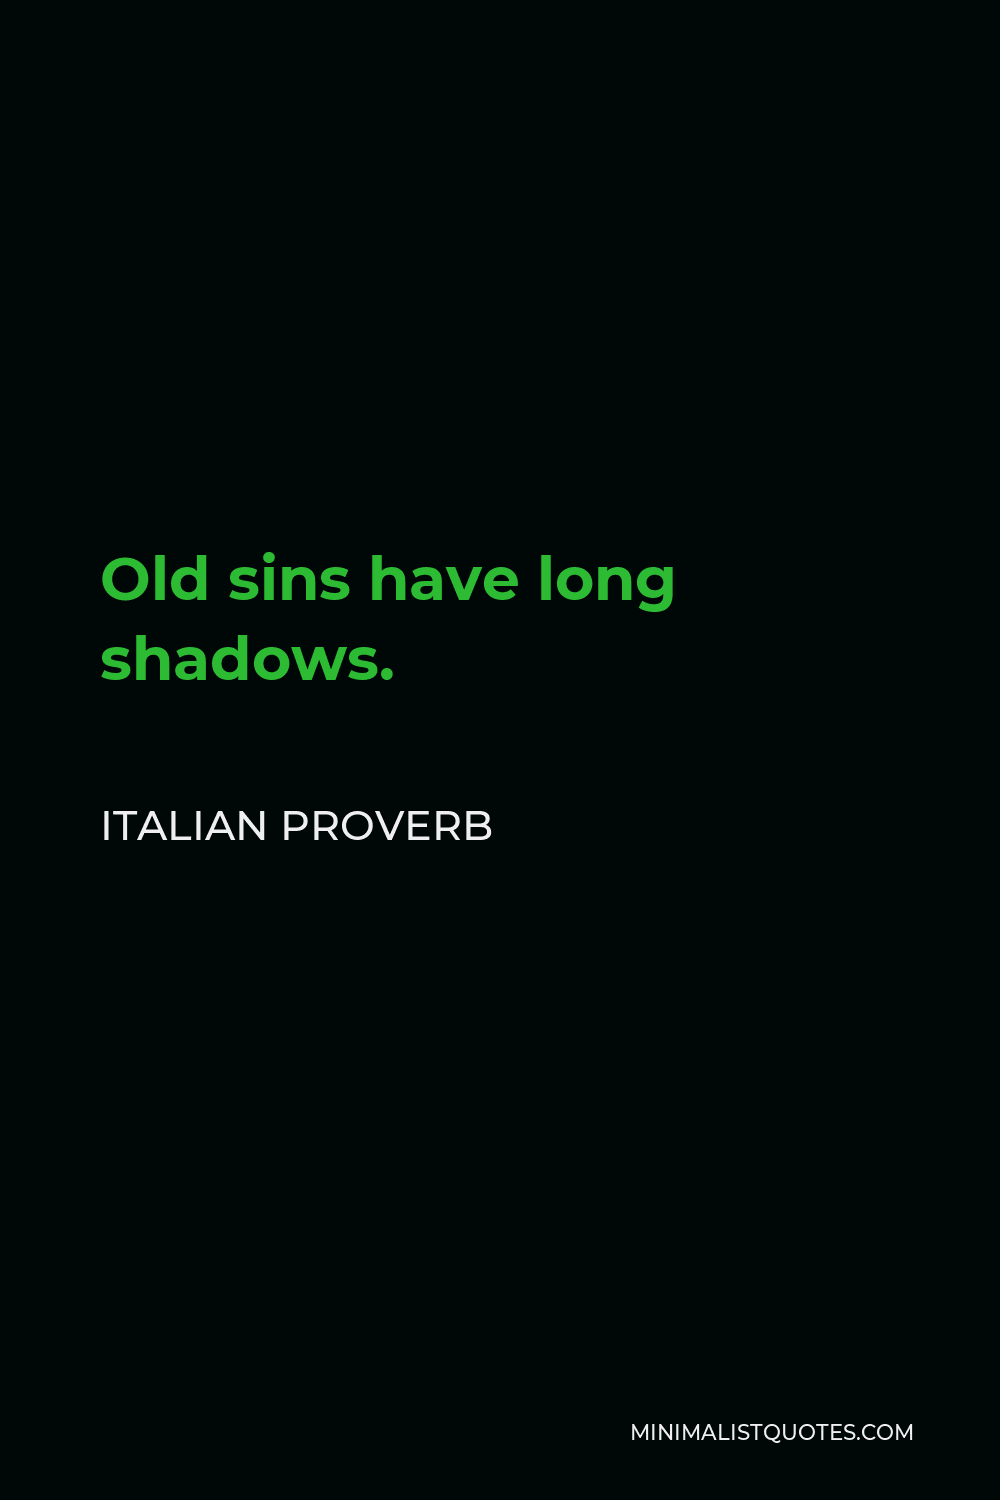 Italian Proverb Quote - Old sins have long shadows.